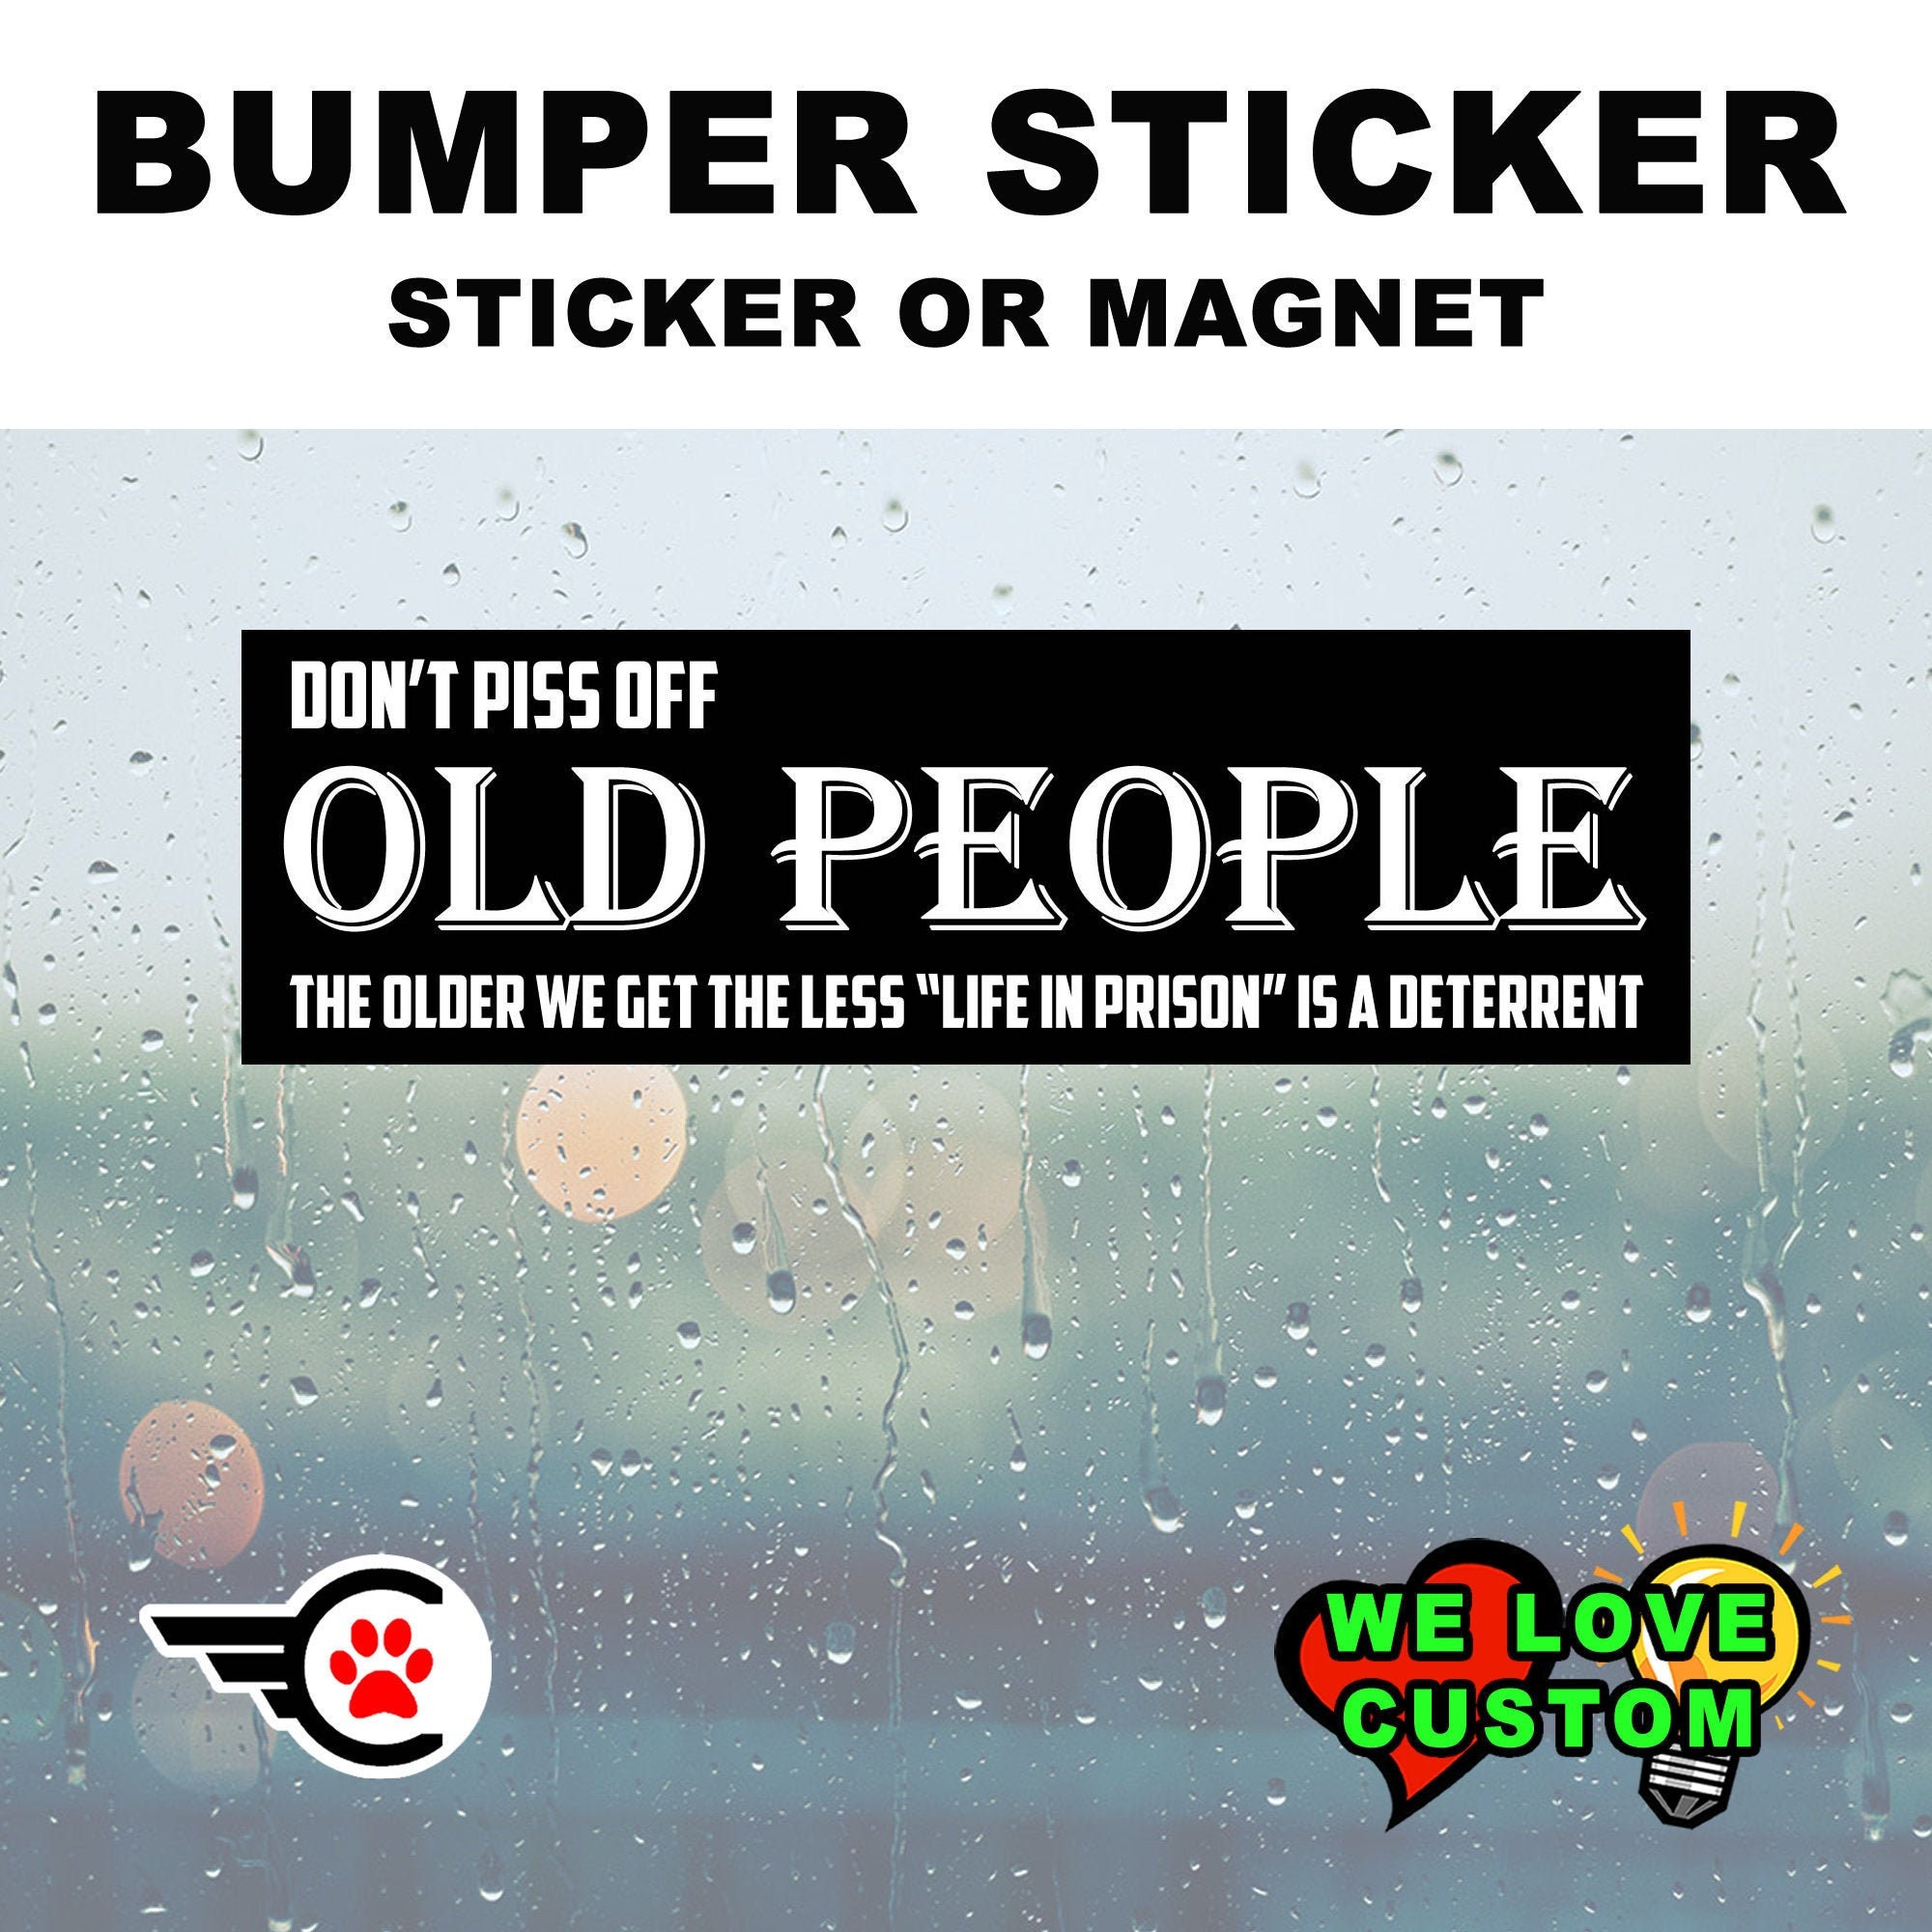 Don't Piss Off OLD PEOPLE The Older We Get The Less Life In Prison Is A Deterrent 10 x 3 bumper sticker or bumper magnet